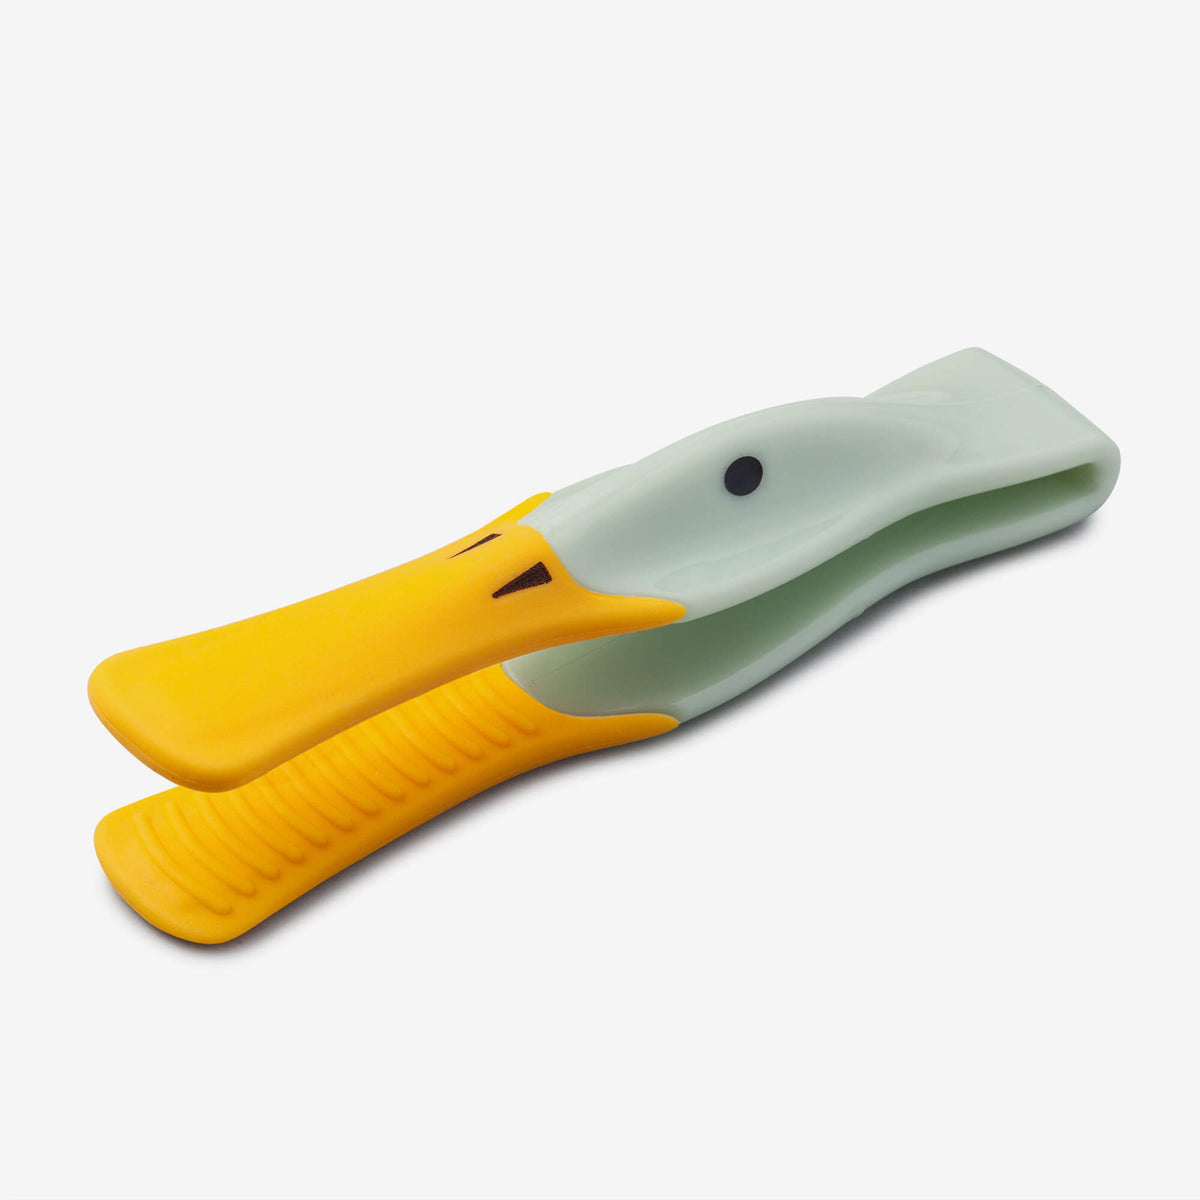 Zeal Silicone Mini Tongs 20cm, Cooking & Dining, Buy Online, UK Delivery